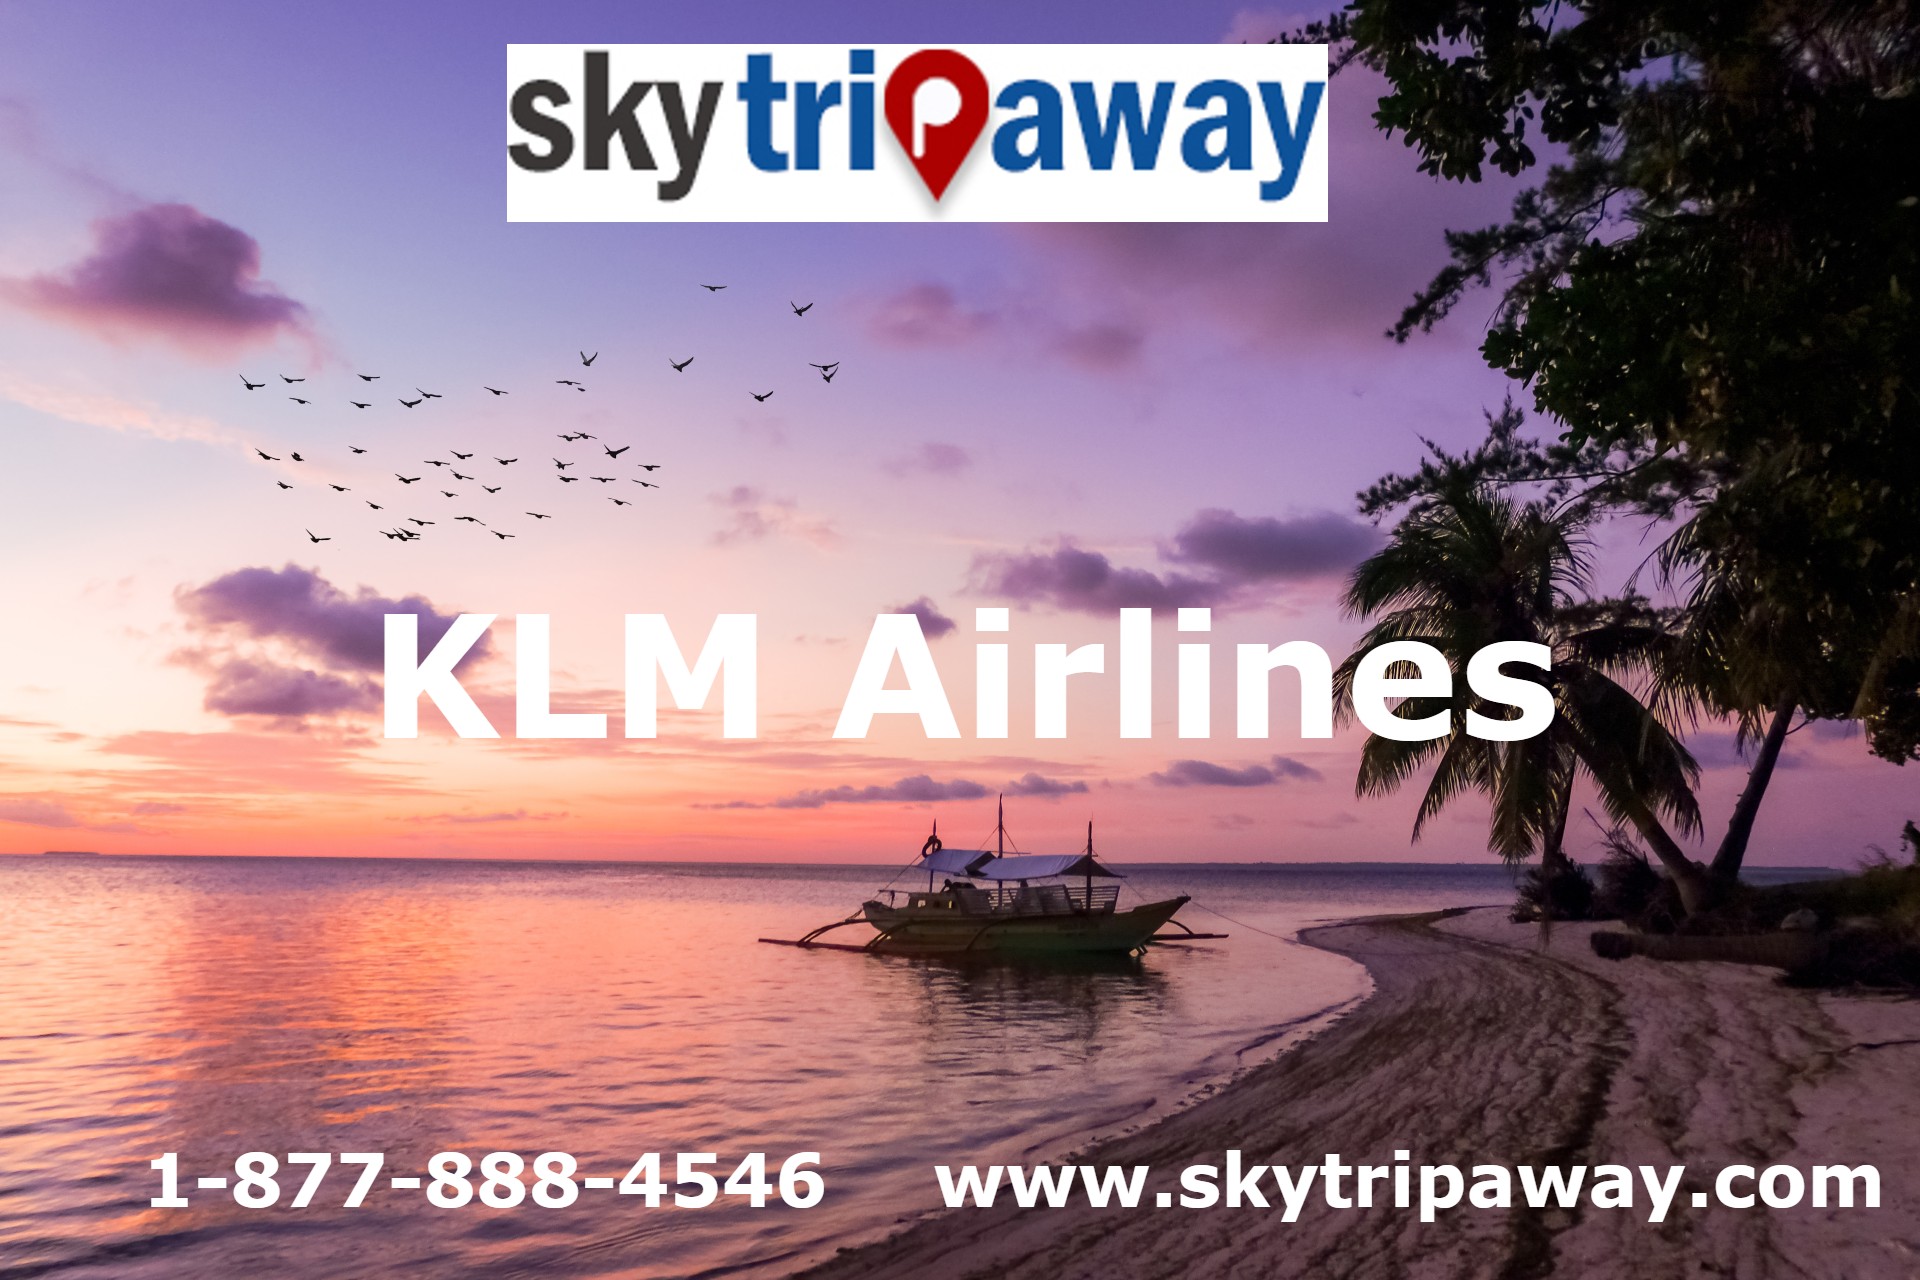  How to book tickets from klm airlines reservations phone number?